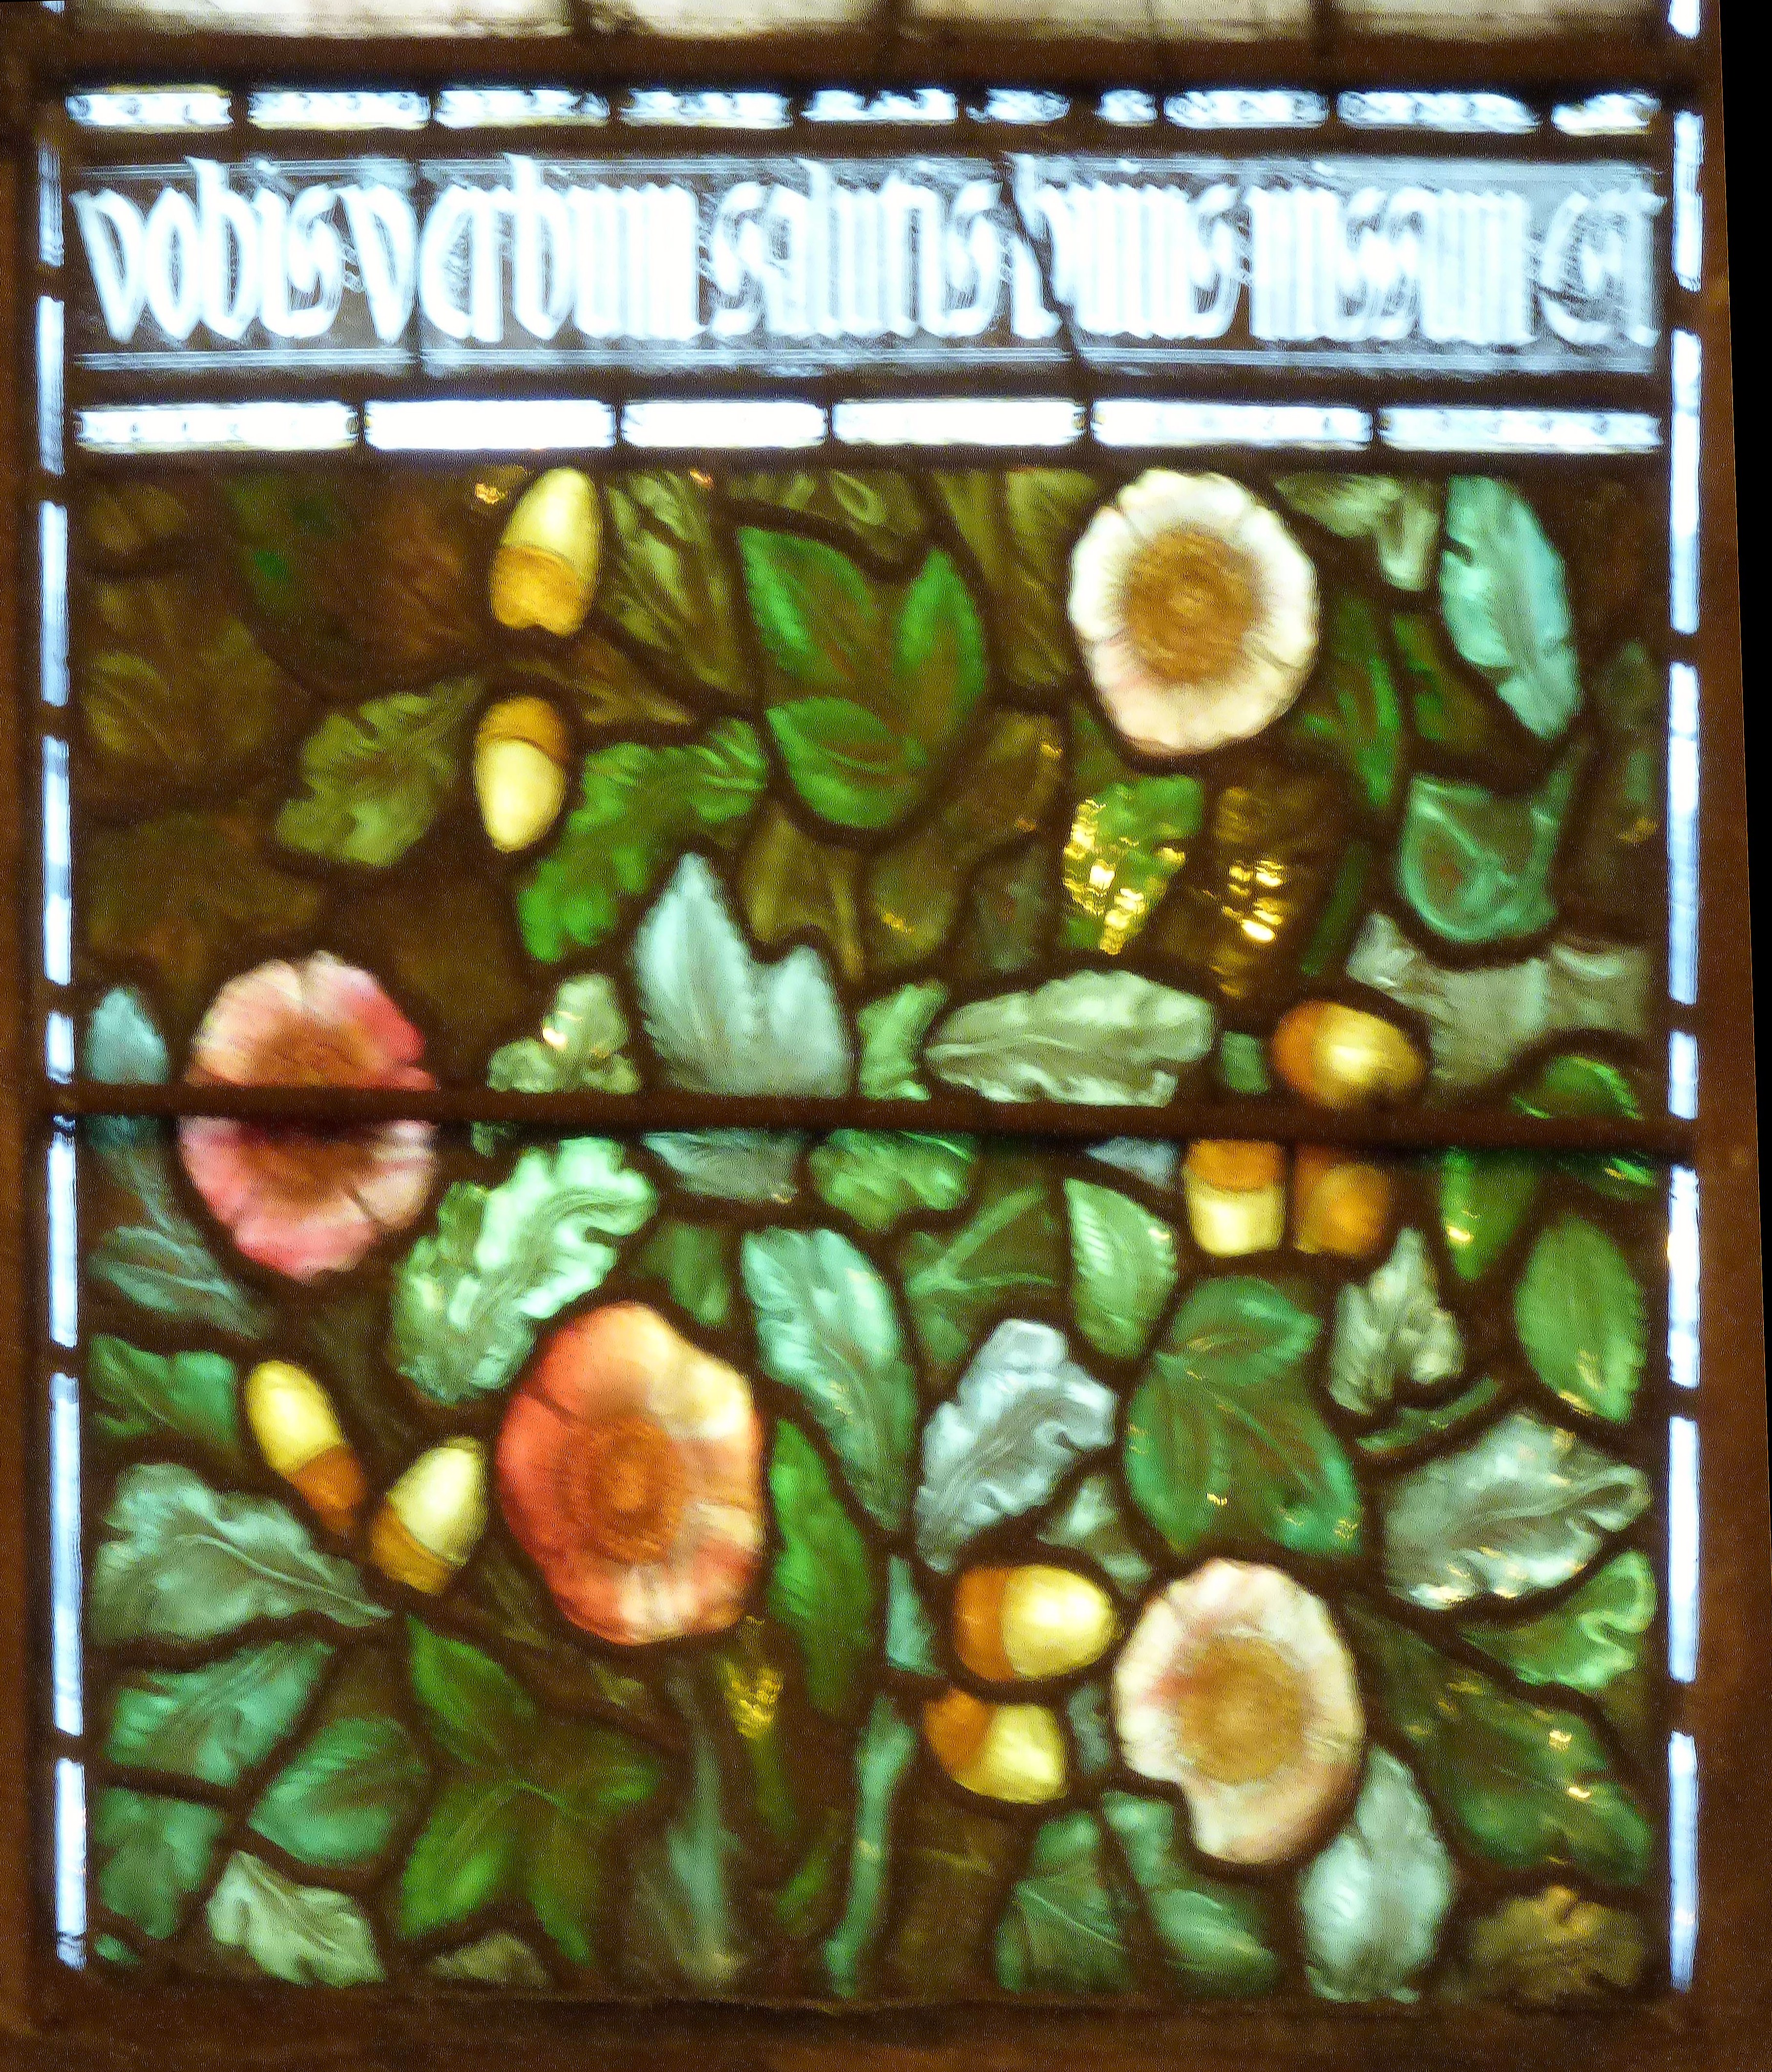 stained glass windows in All Hallows Church, Liverpool, Feb 2022